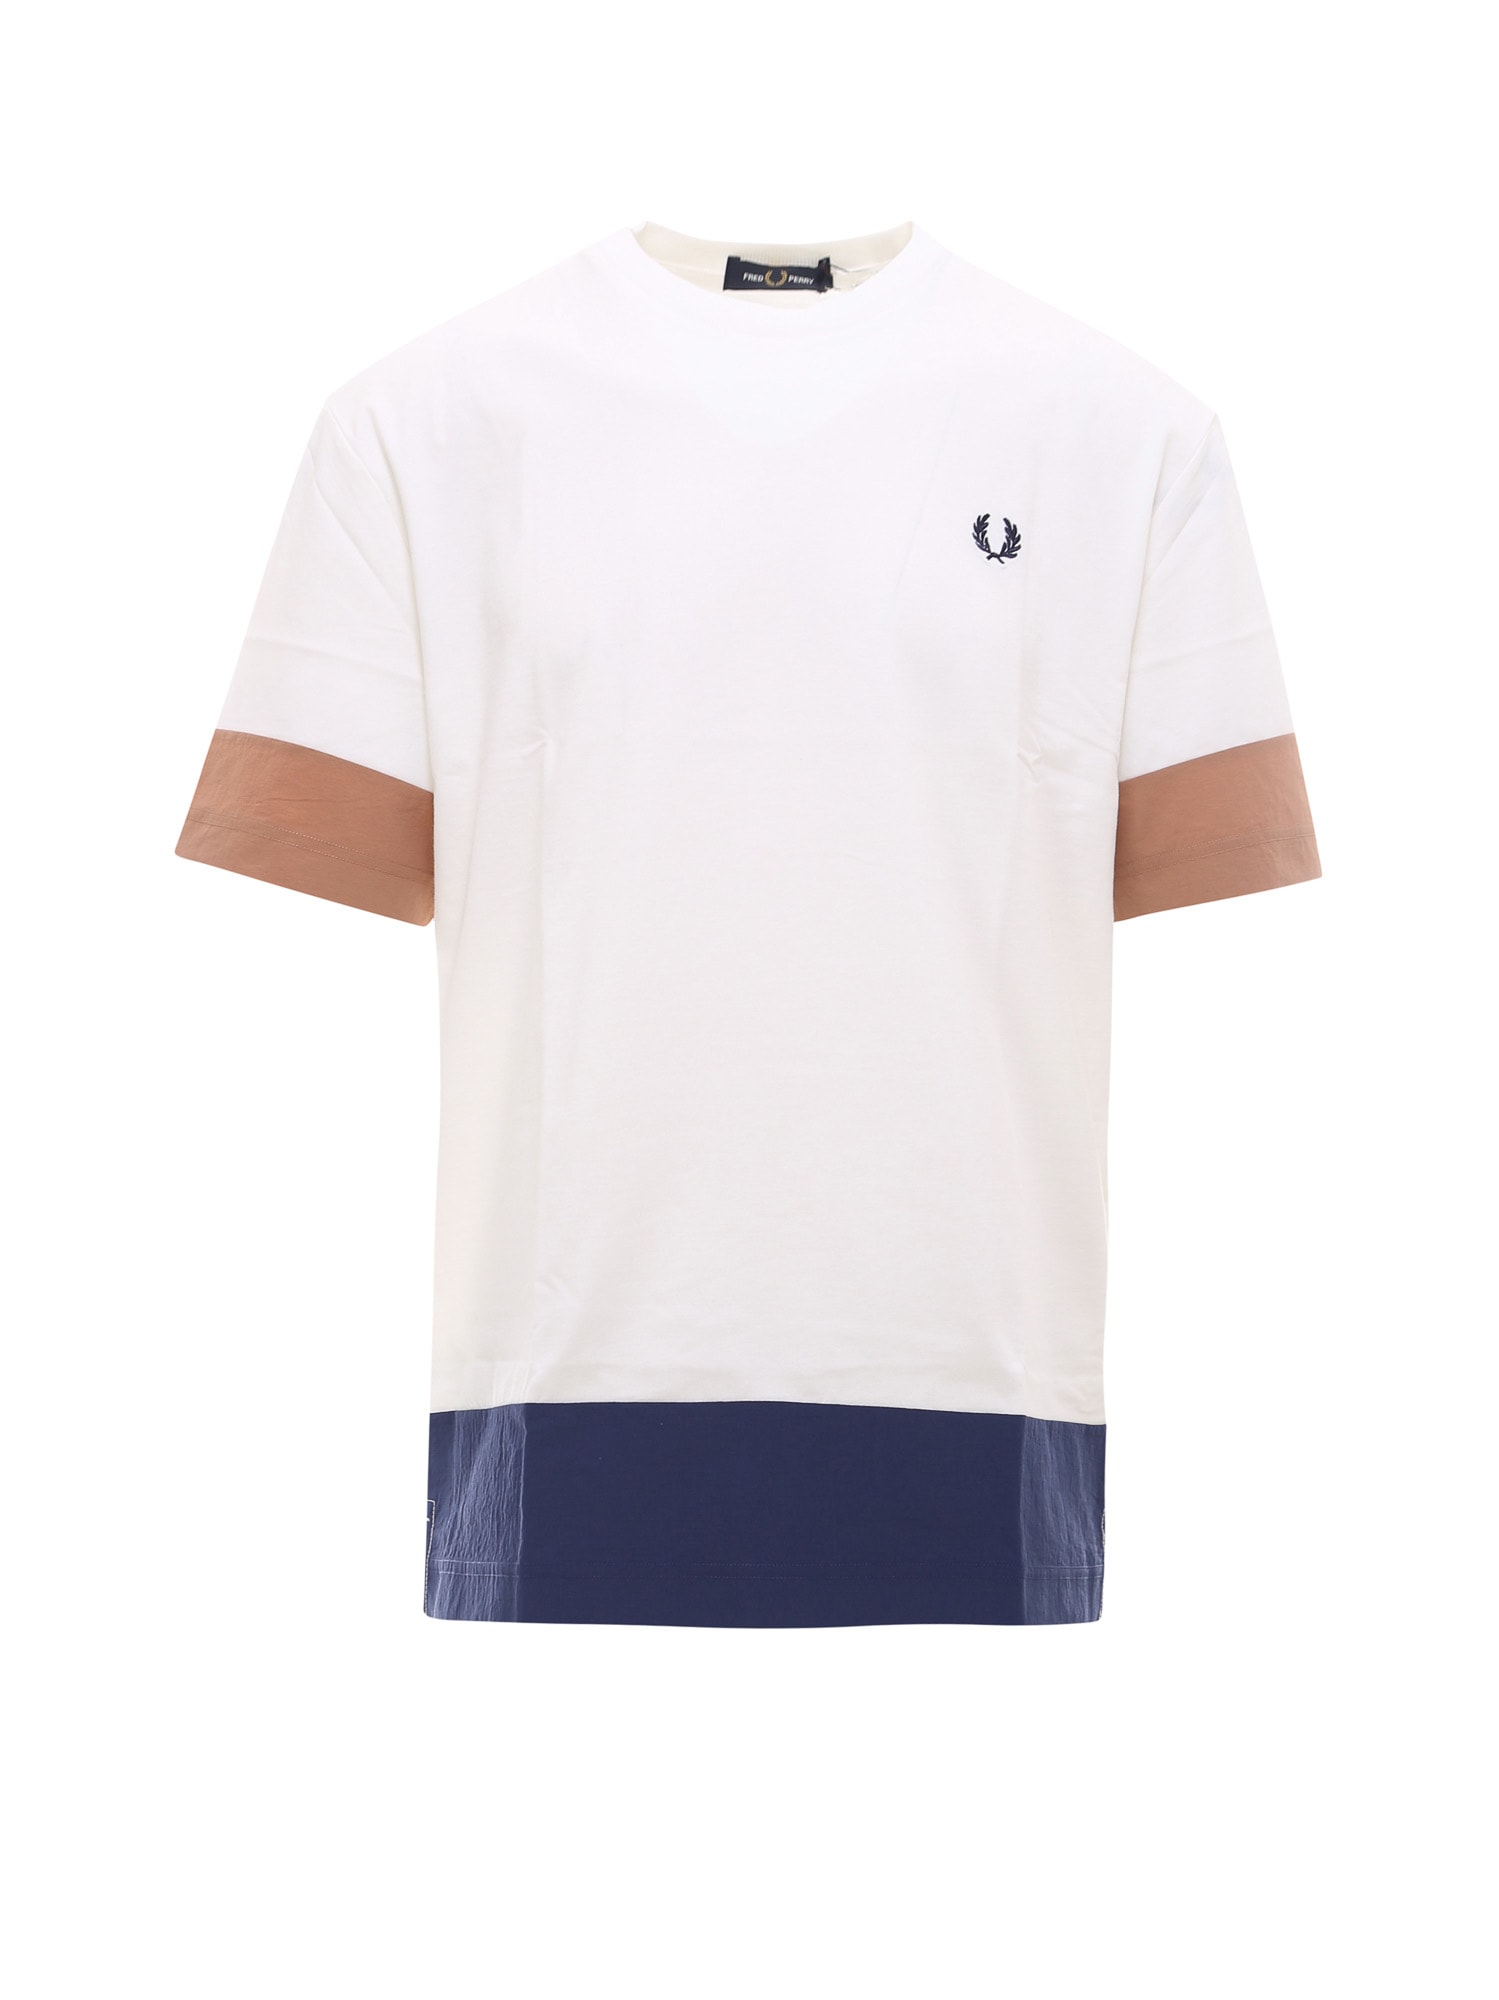 FRED PERRY T-SHIRT,FPM160337 129